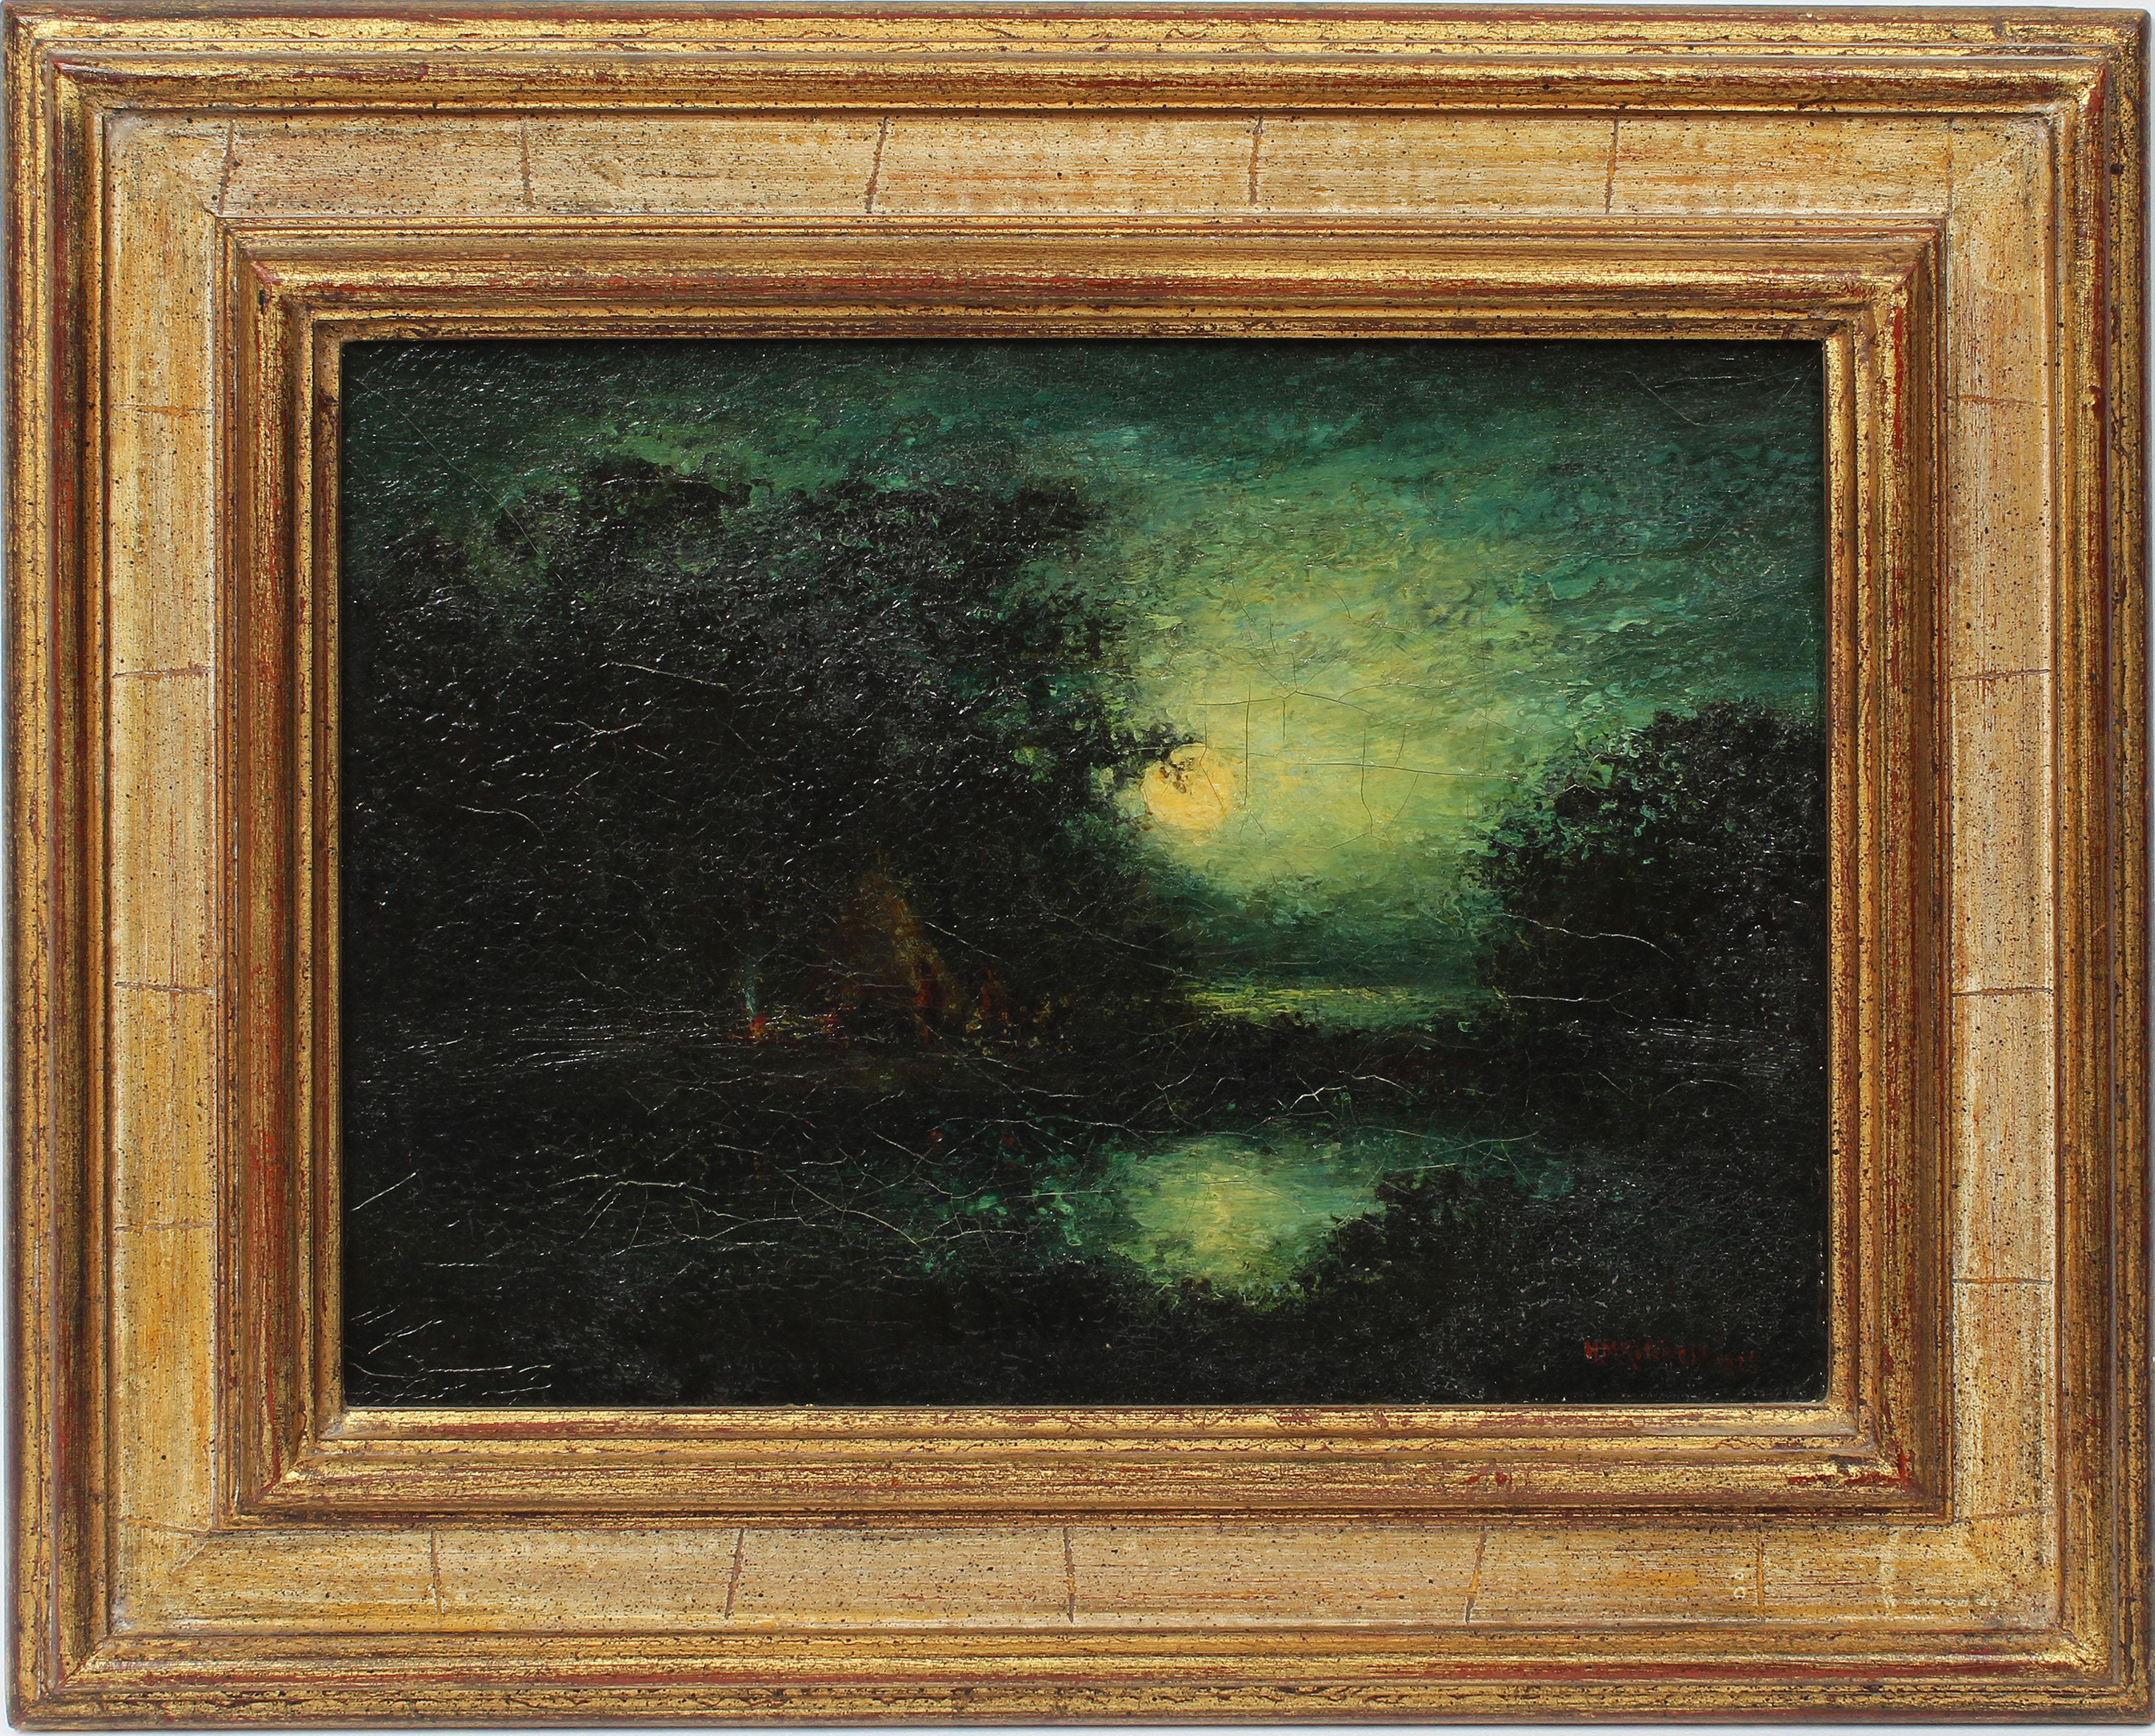 Hudson Mindell Kitchell Landscape Painting - American Masterpiece Moonlit Nocturnal Glowing Landscape Original Oil Painting 2